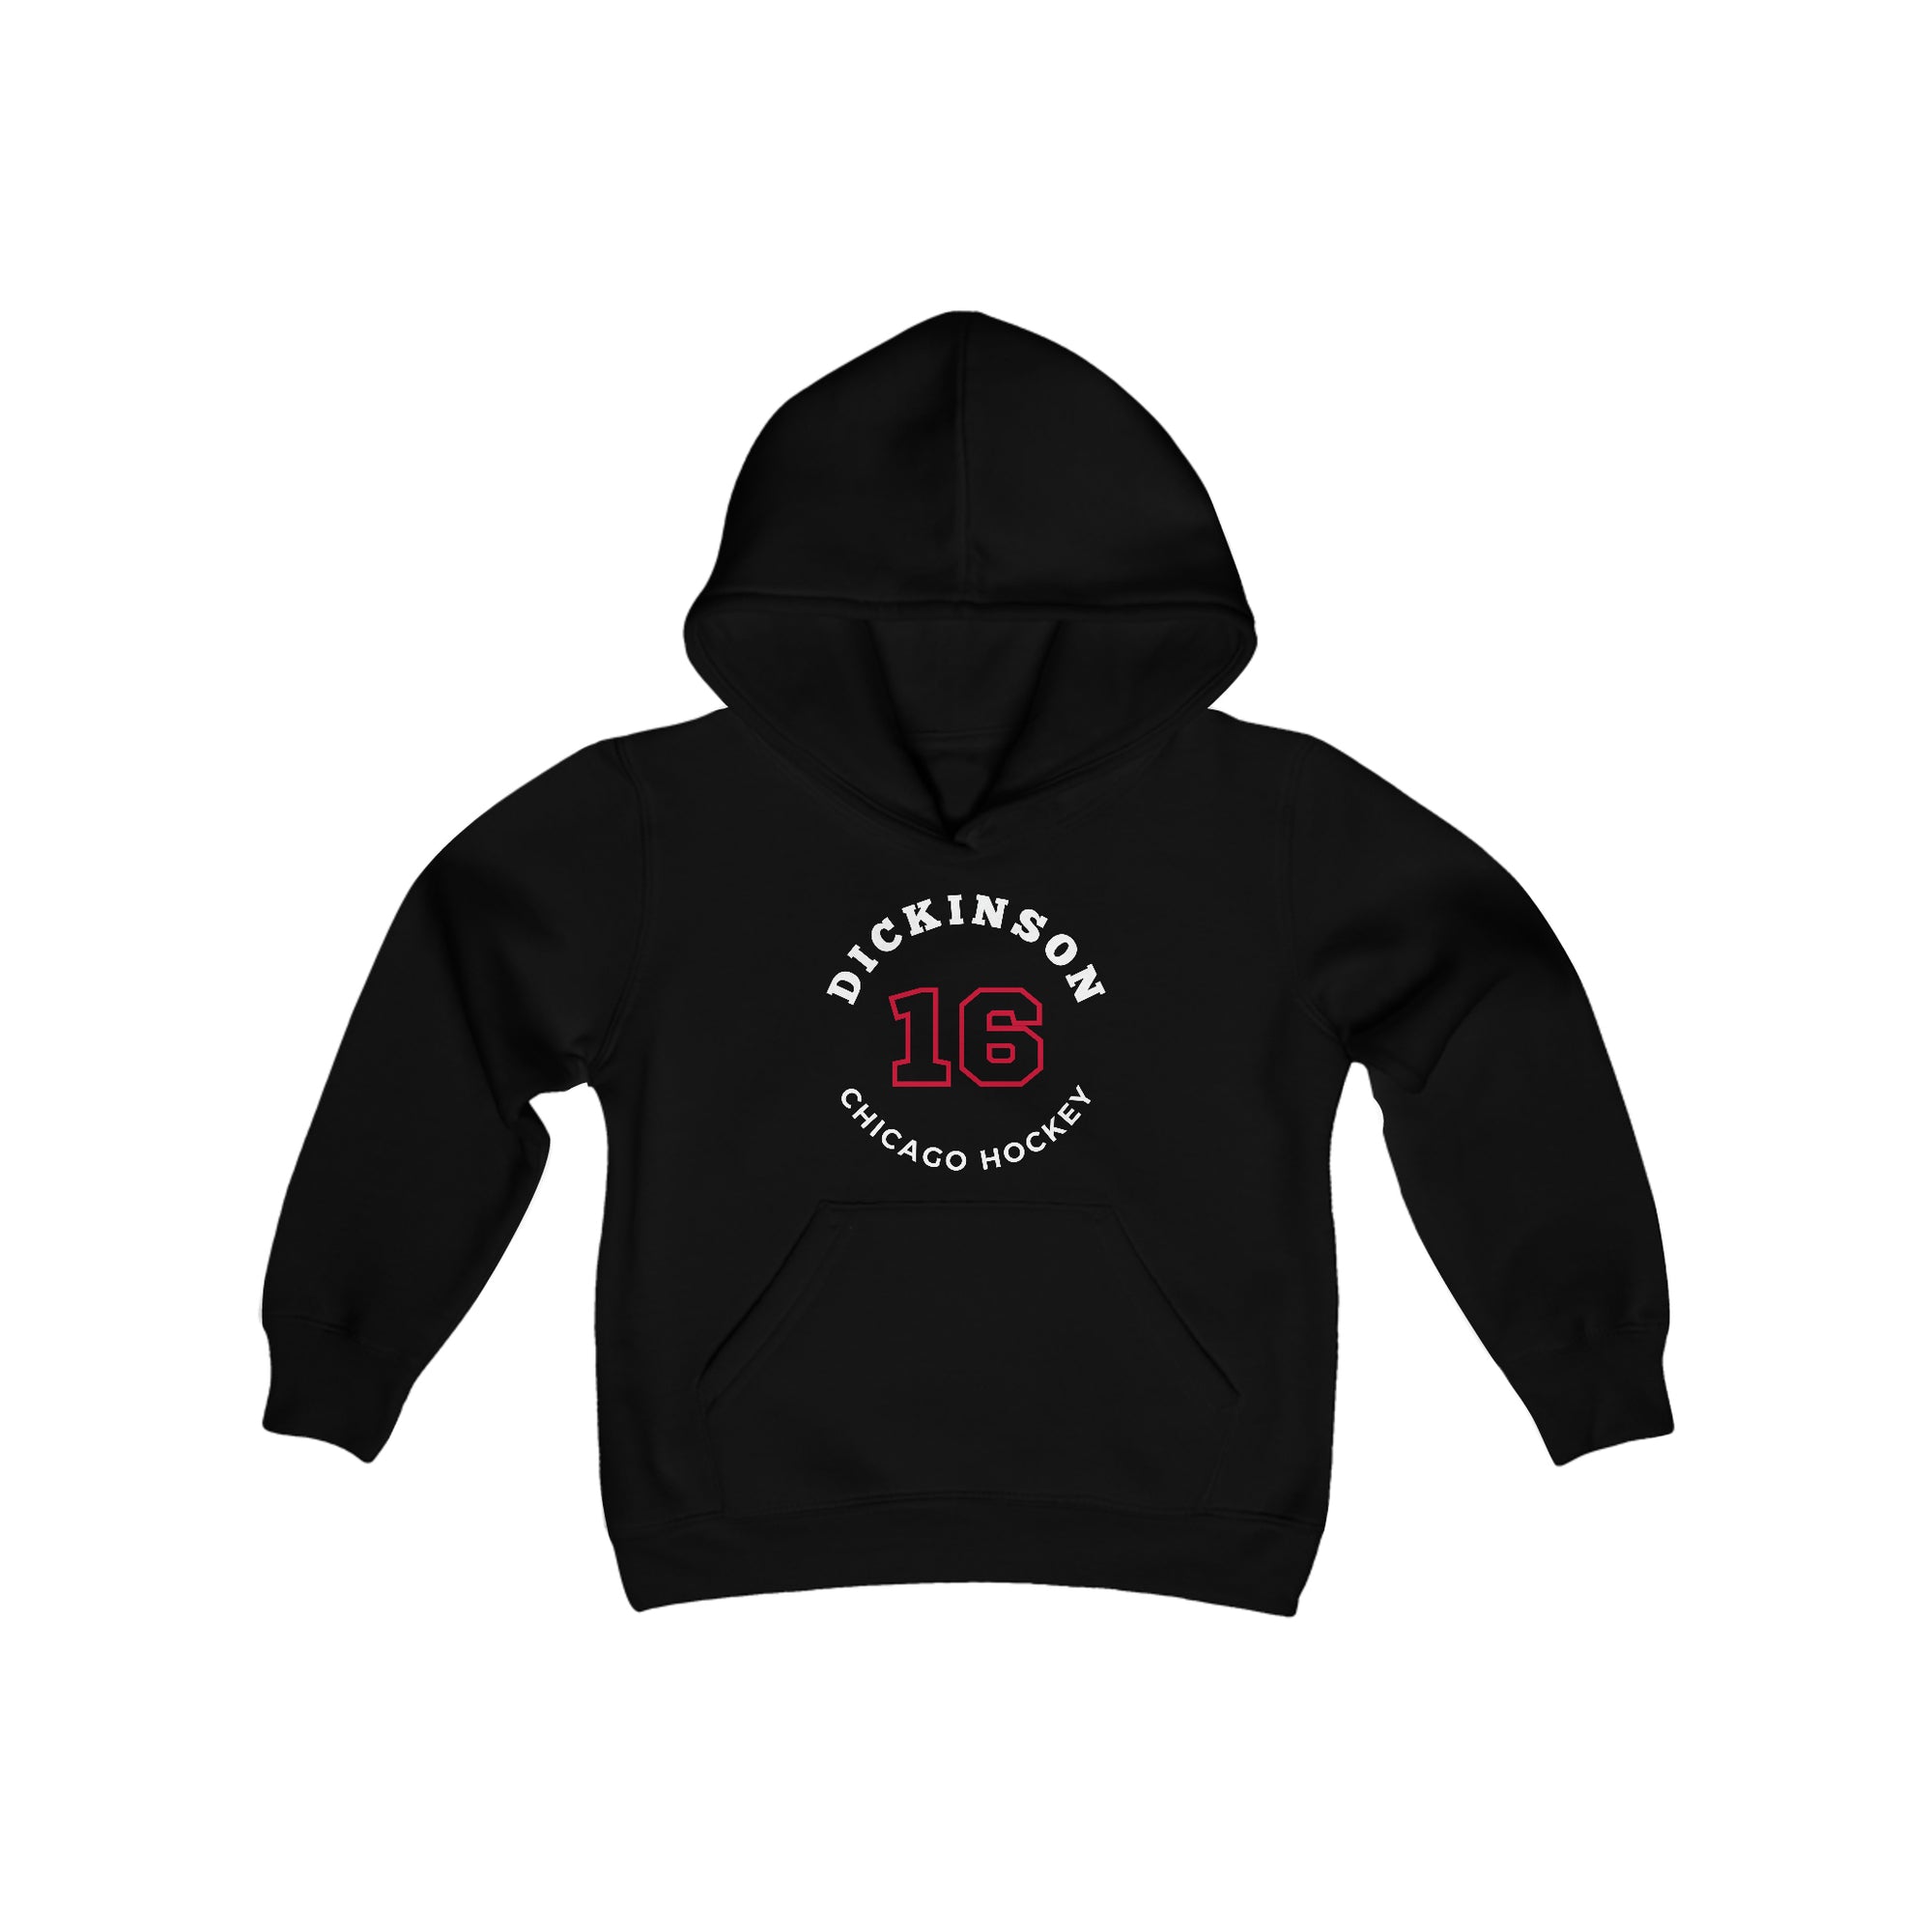 Dickinson 16 Chicago Hockey Number Arch Design Youth Hooded Sweatshirt